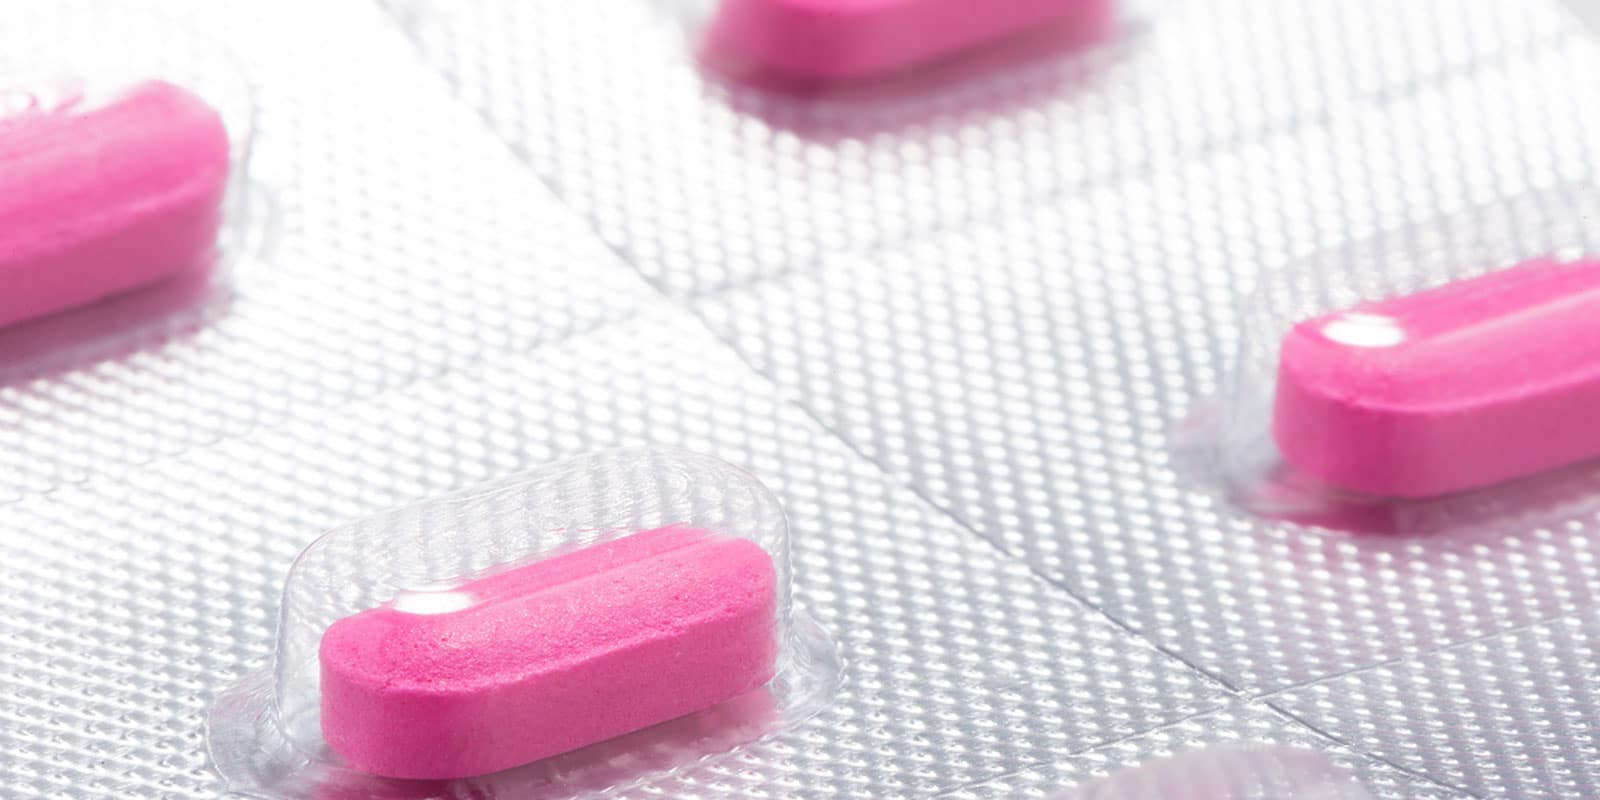 Benadryl and Alcohol: What You Need to Know